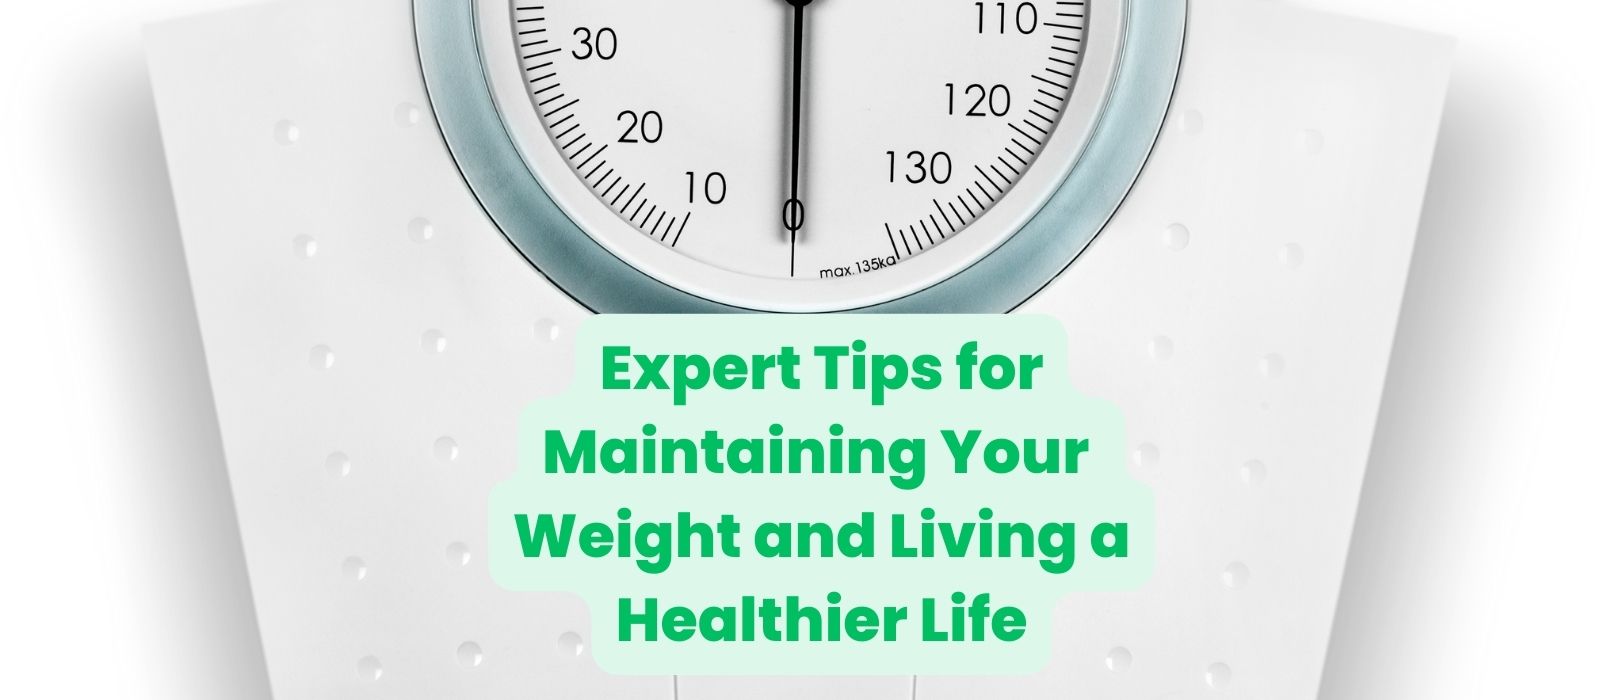 10 Expert Tips for Maintaining Your Weight and Living a Healthier Life